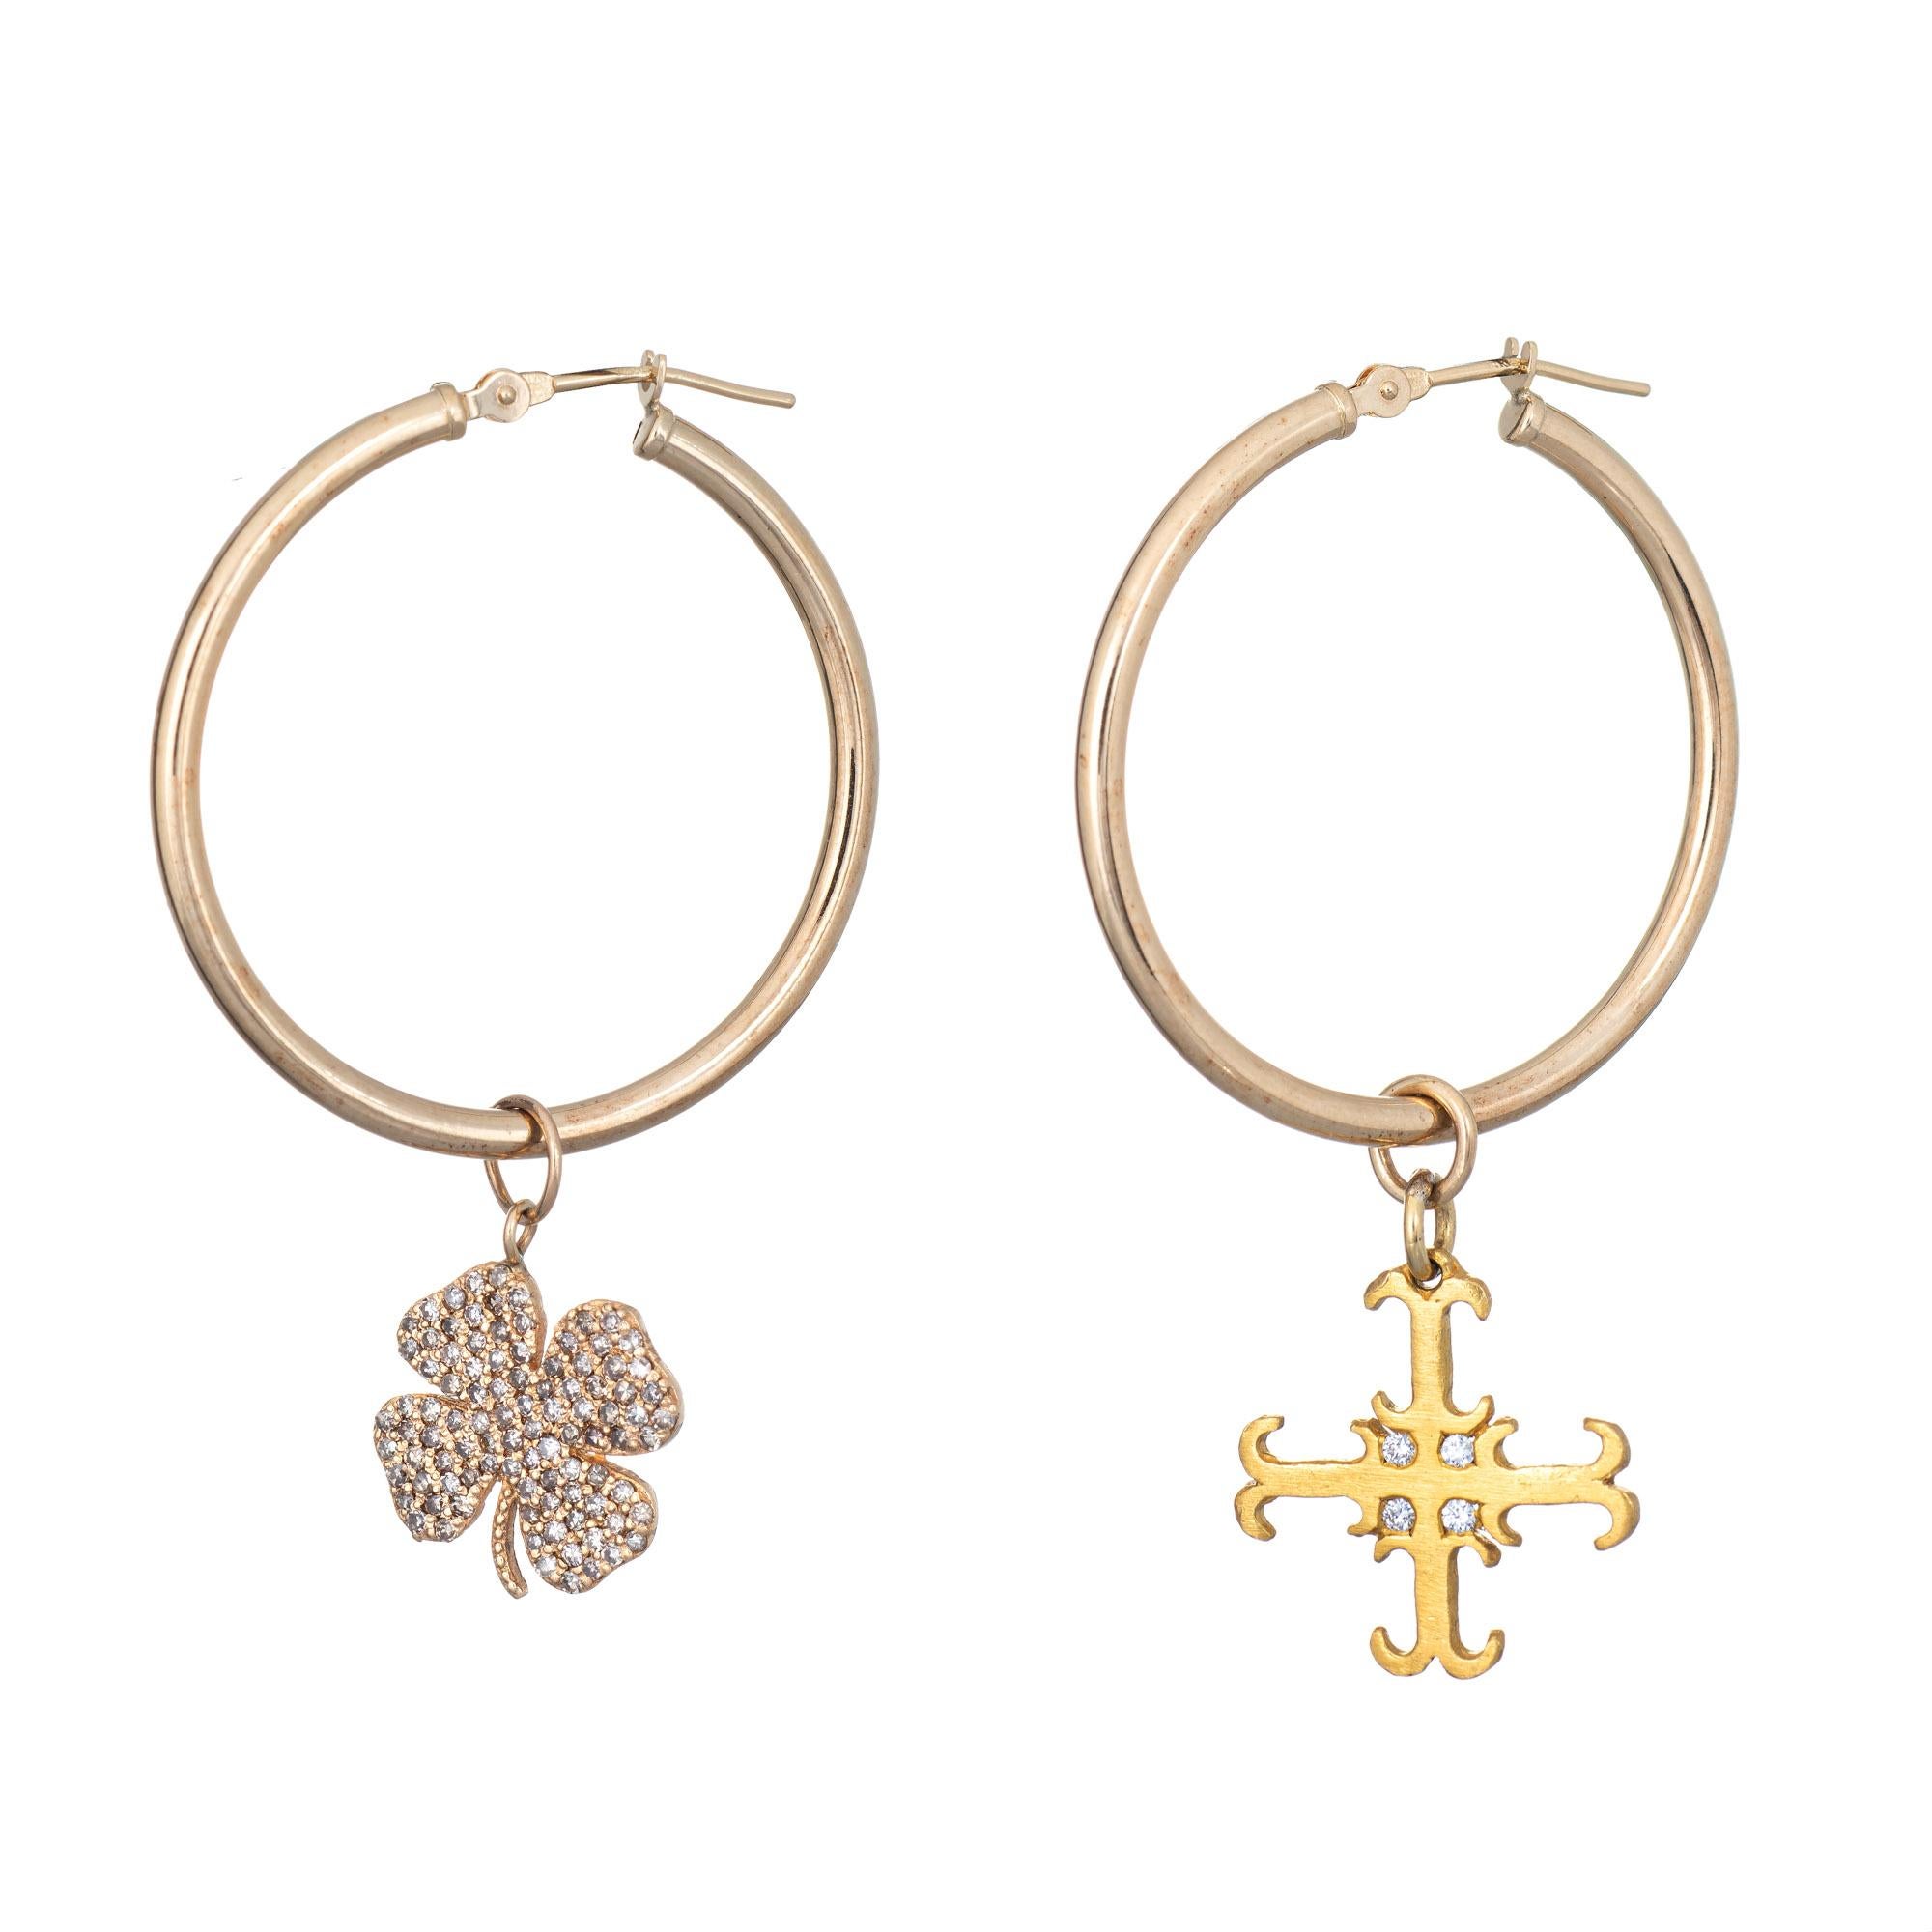 Modern Mismatched Diamond Hoop Earrings Four Leaf Clover Cross Vintage Round Jewelry For Sale